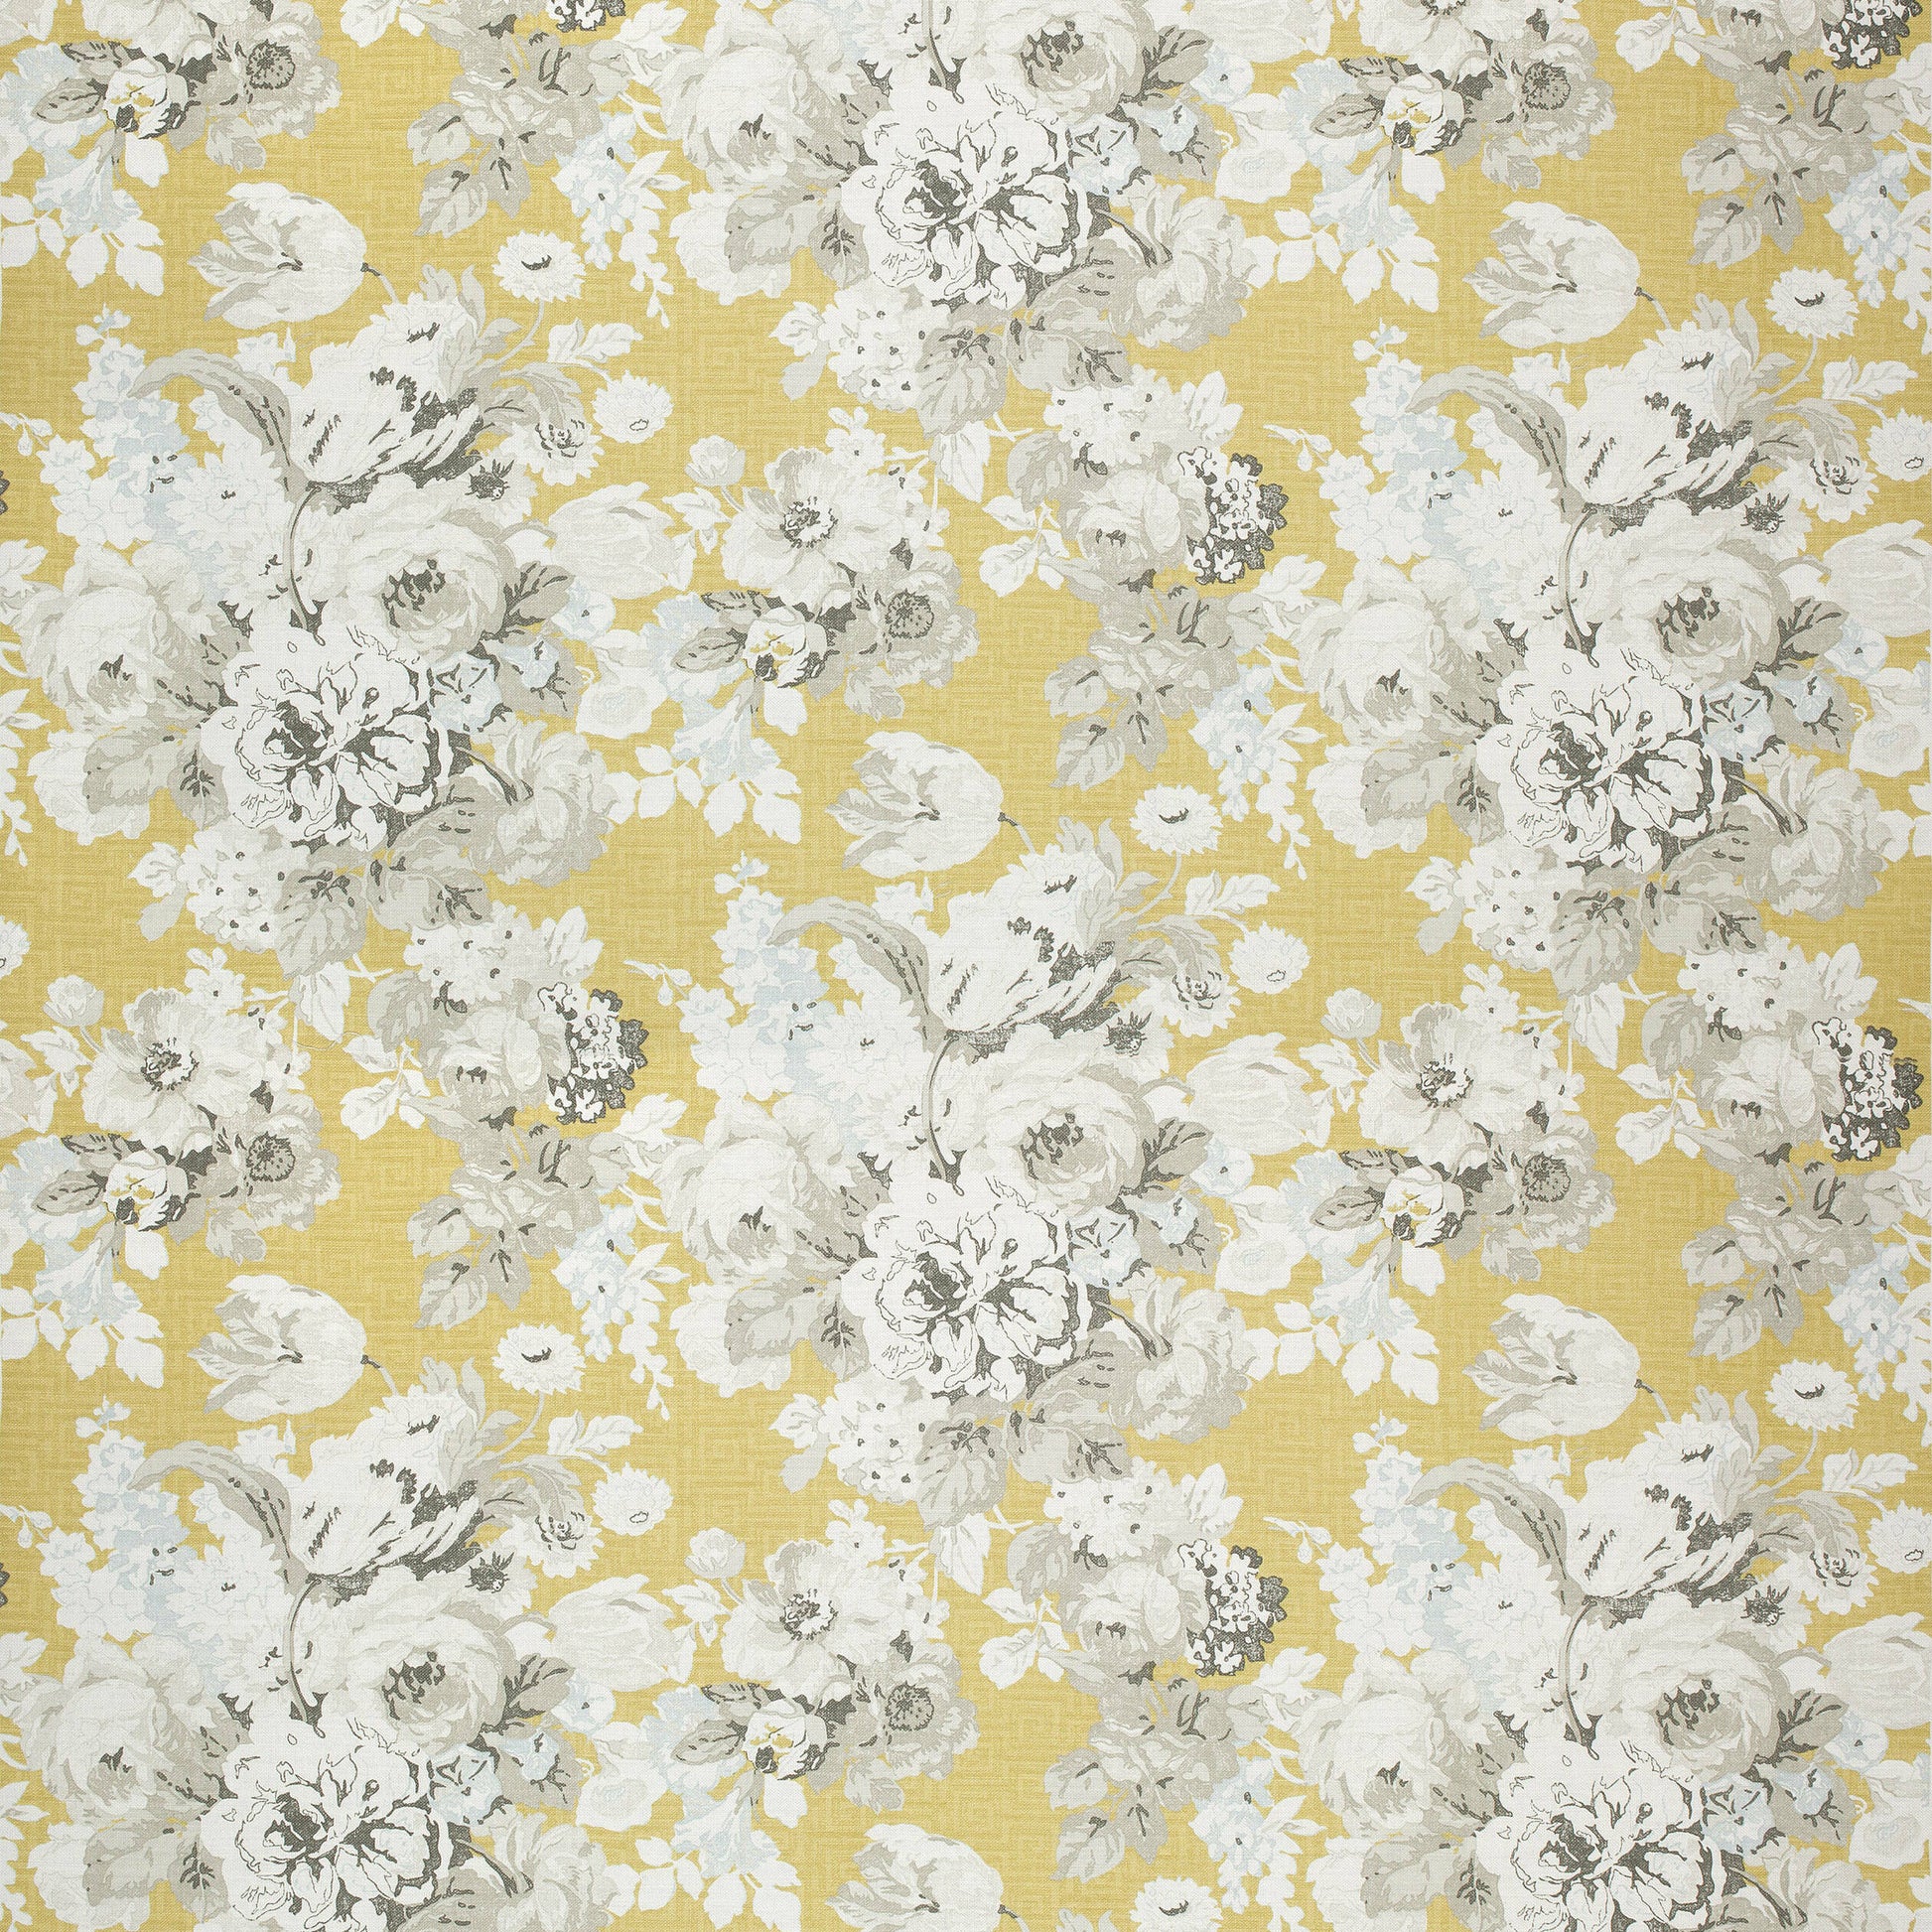 Purchase  Ann French Fabric Product AF26133  pattern name  Wild Floral